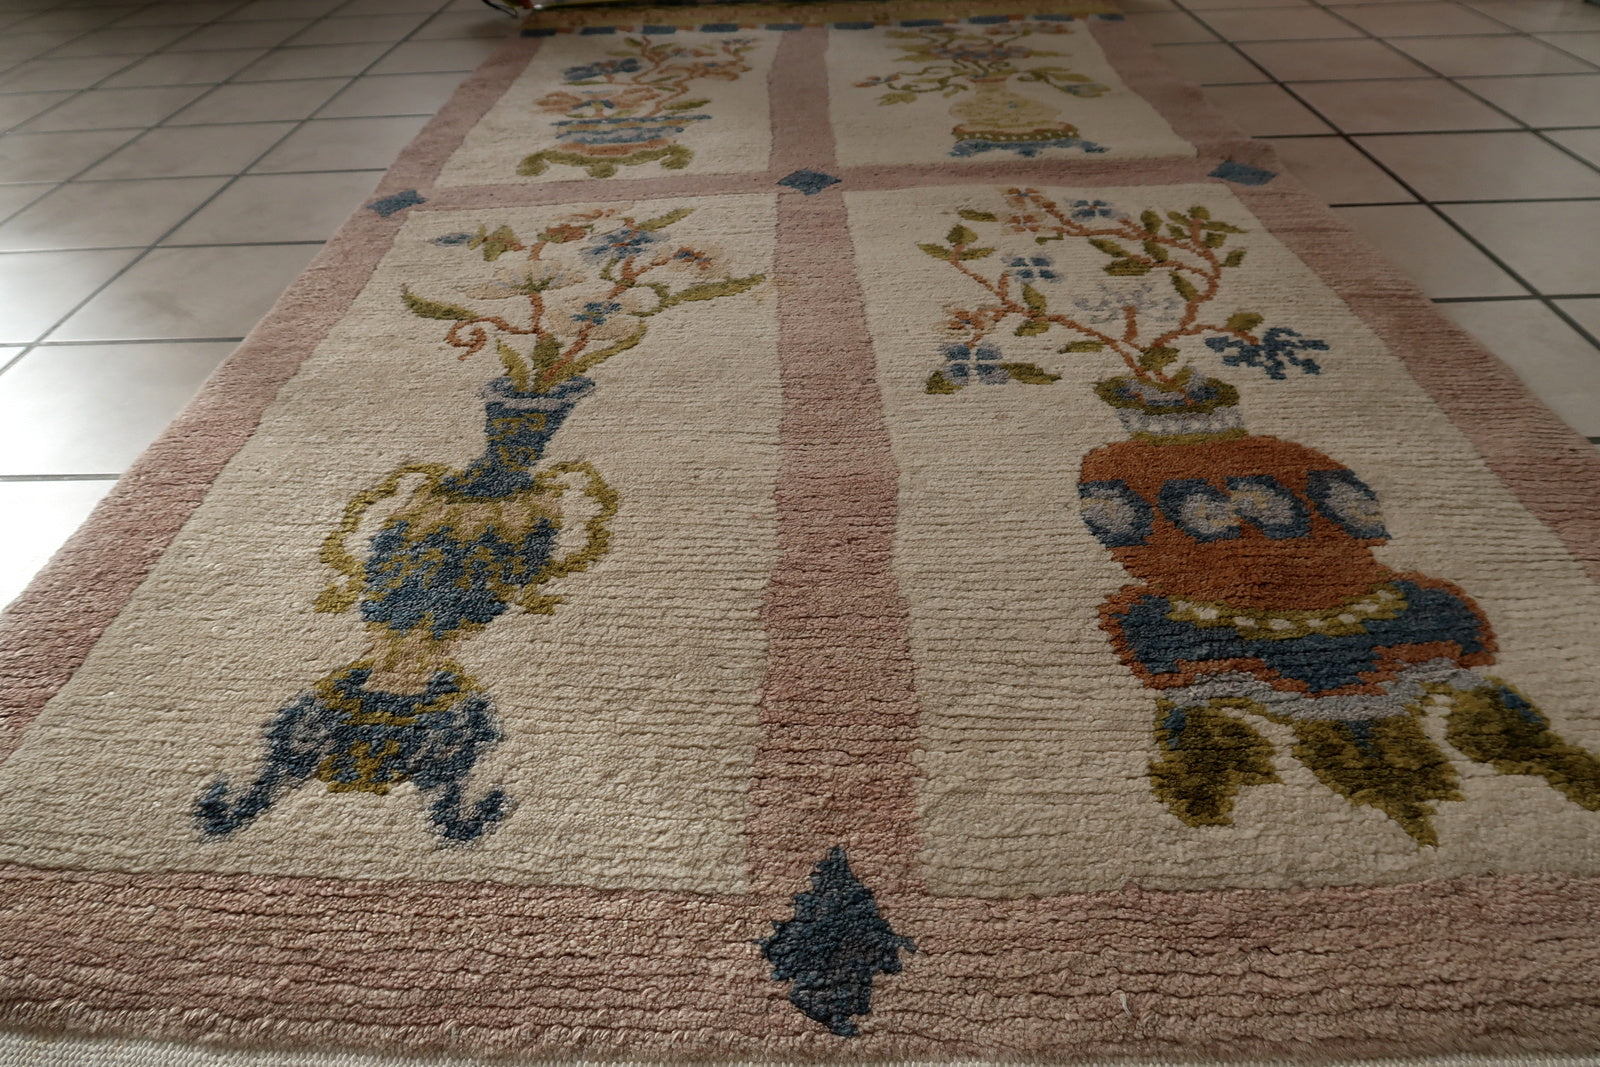 Base Color of Rug in Off-White or Beige, with Decorative Elements in Blues, Reds, Greens, and Browns - 1970s